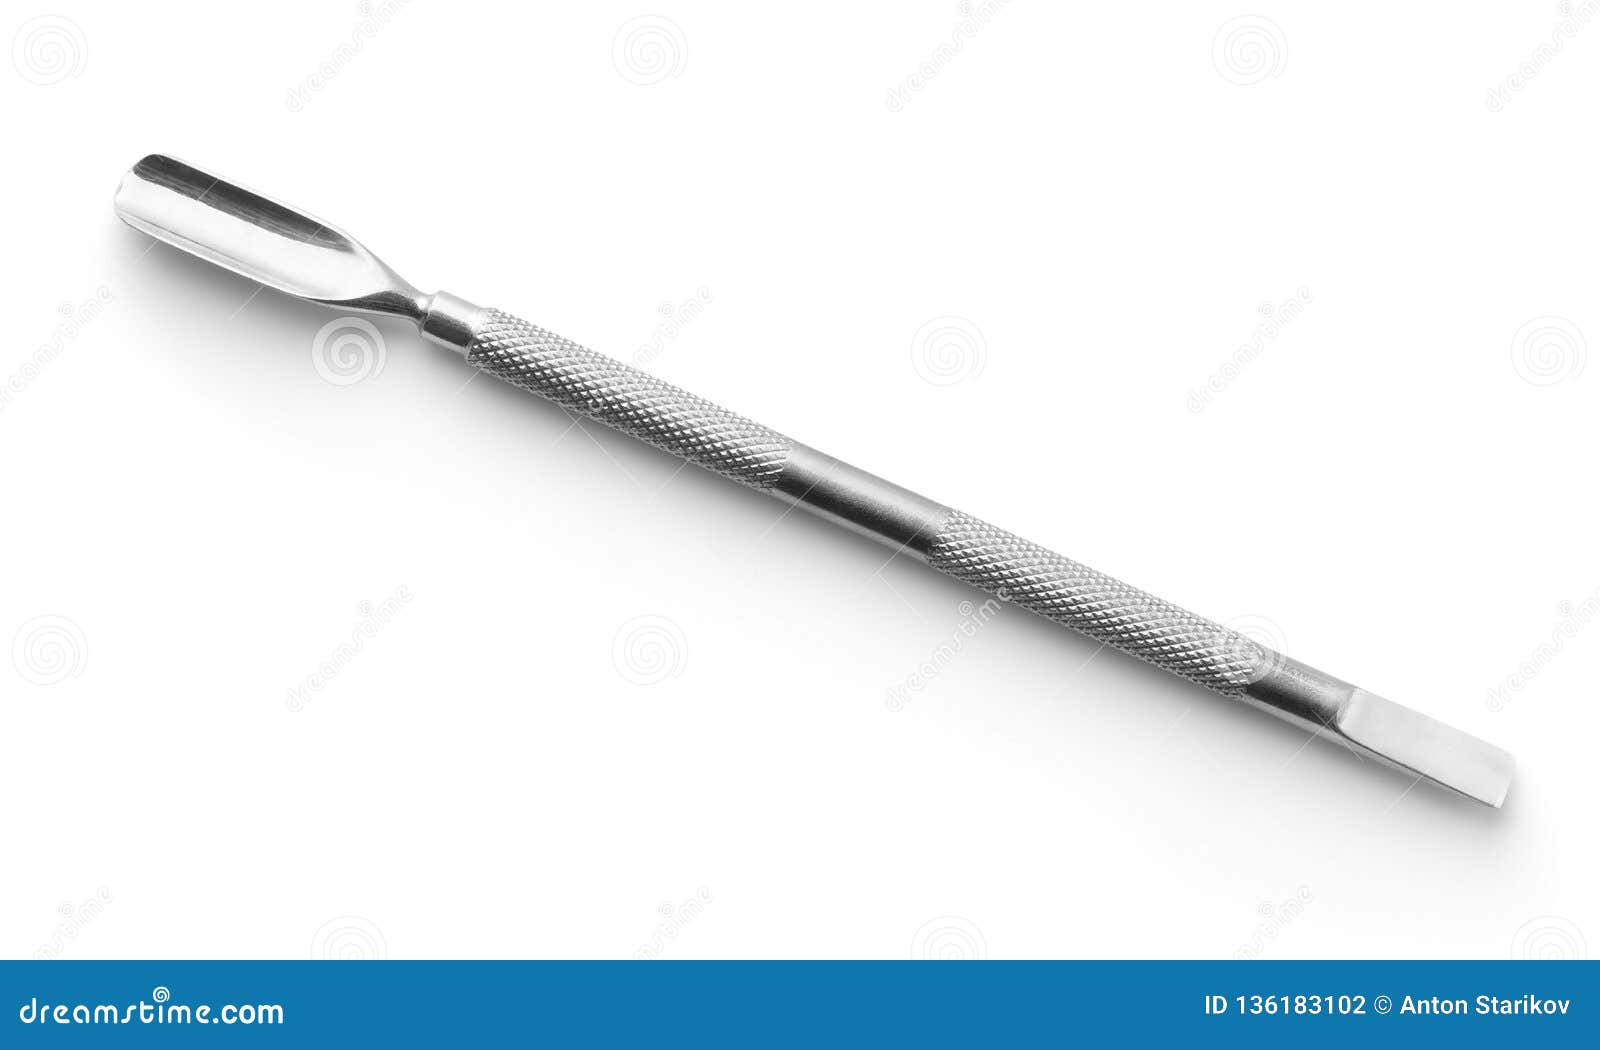 double-ended steel manicure cuticle pusher